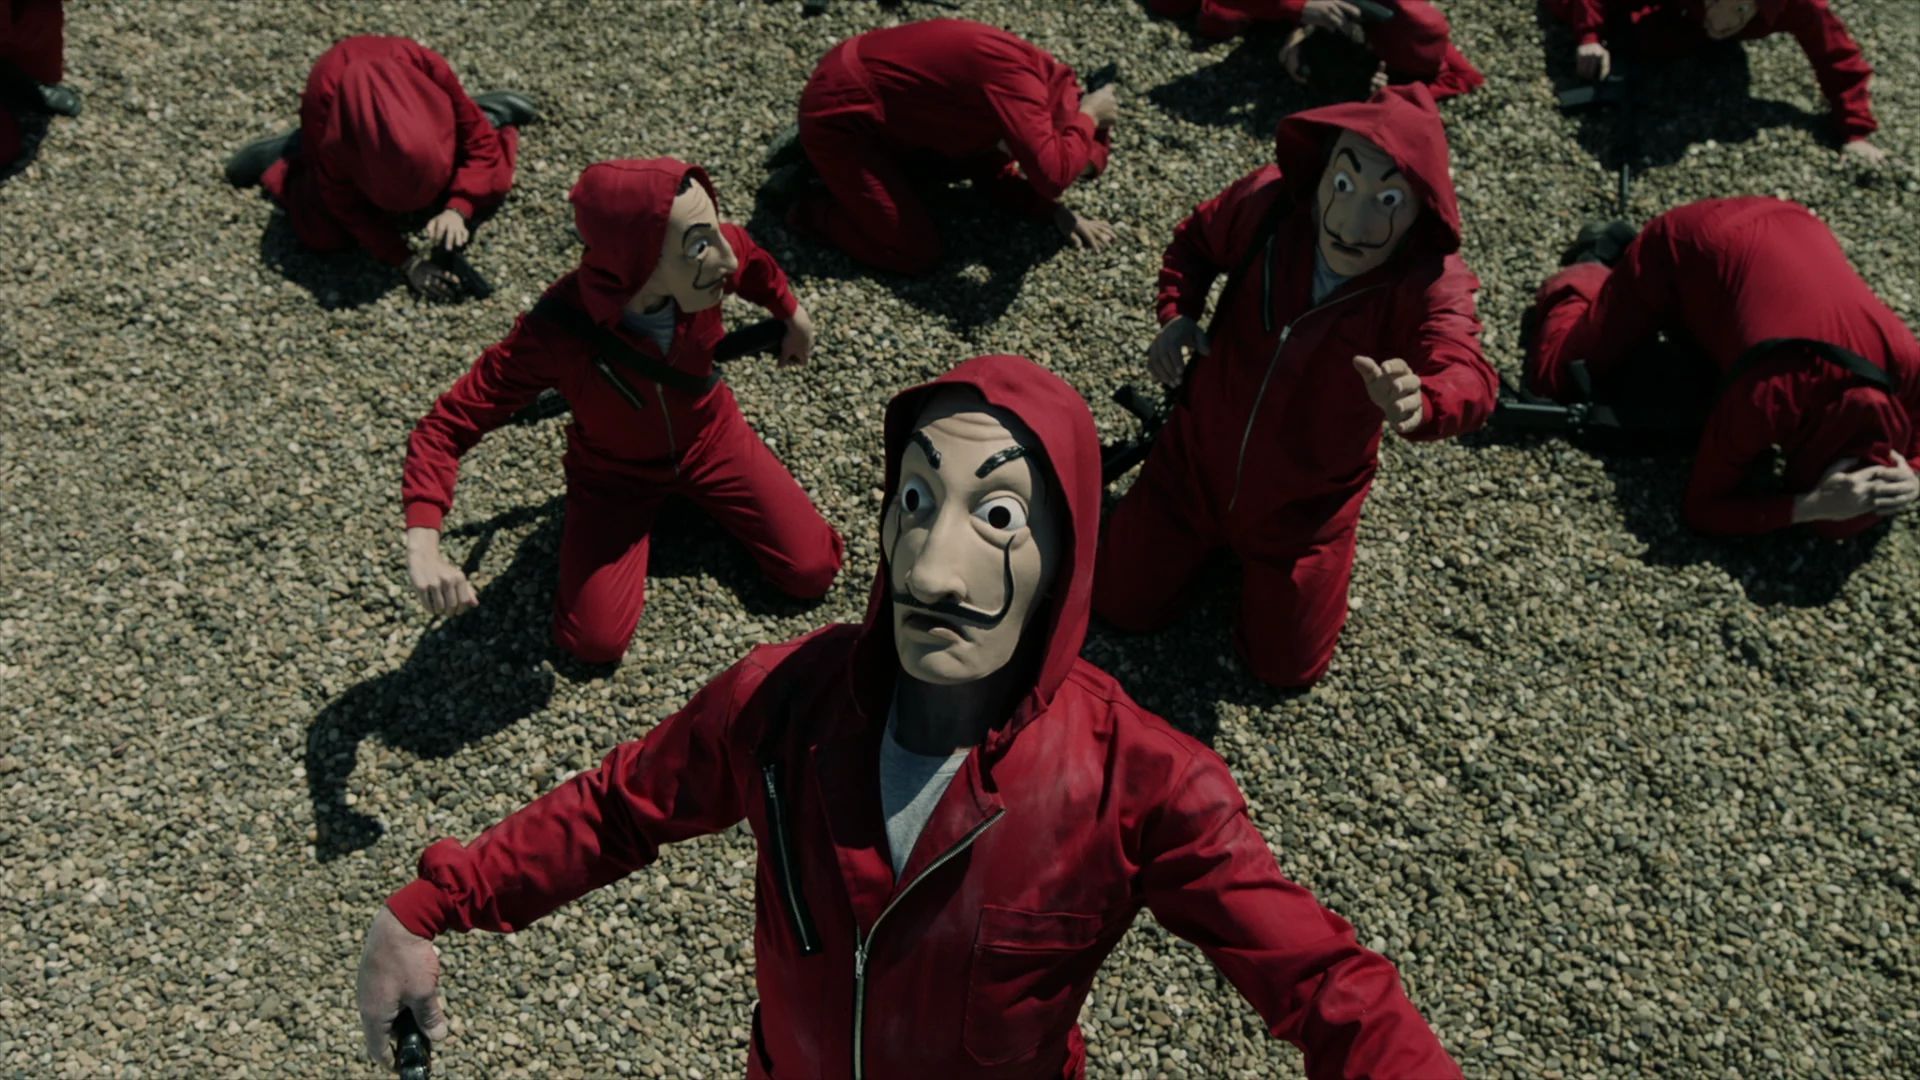 Year 20** is gonna be too much fun!: When is La Casa De Papel